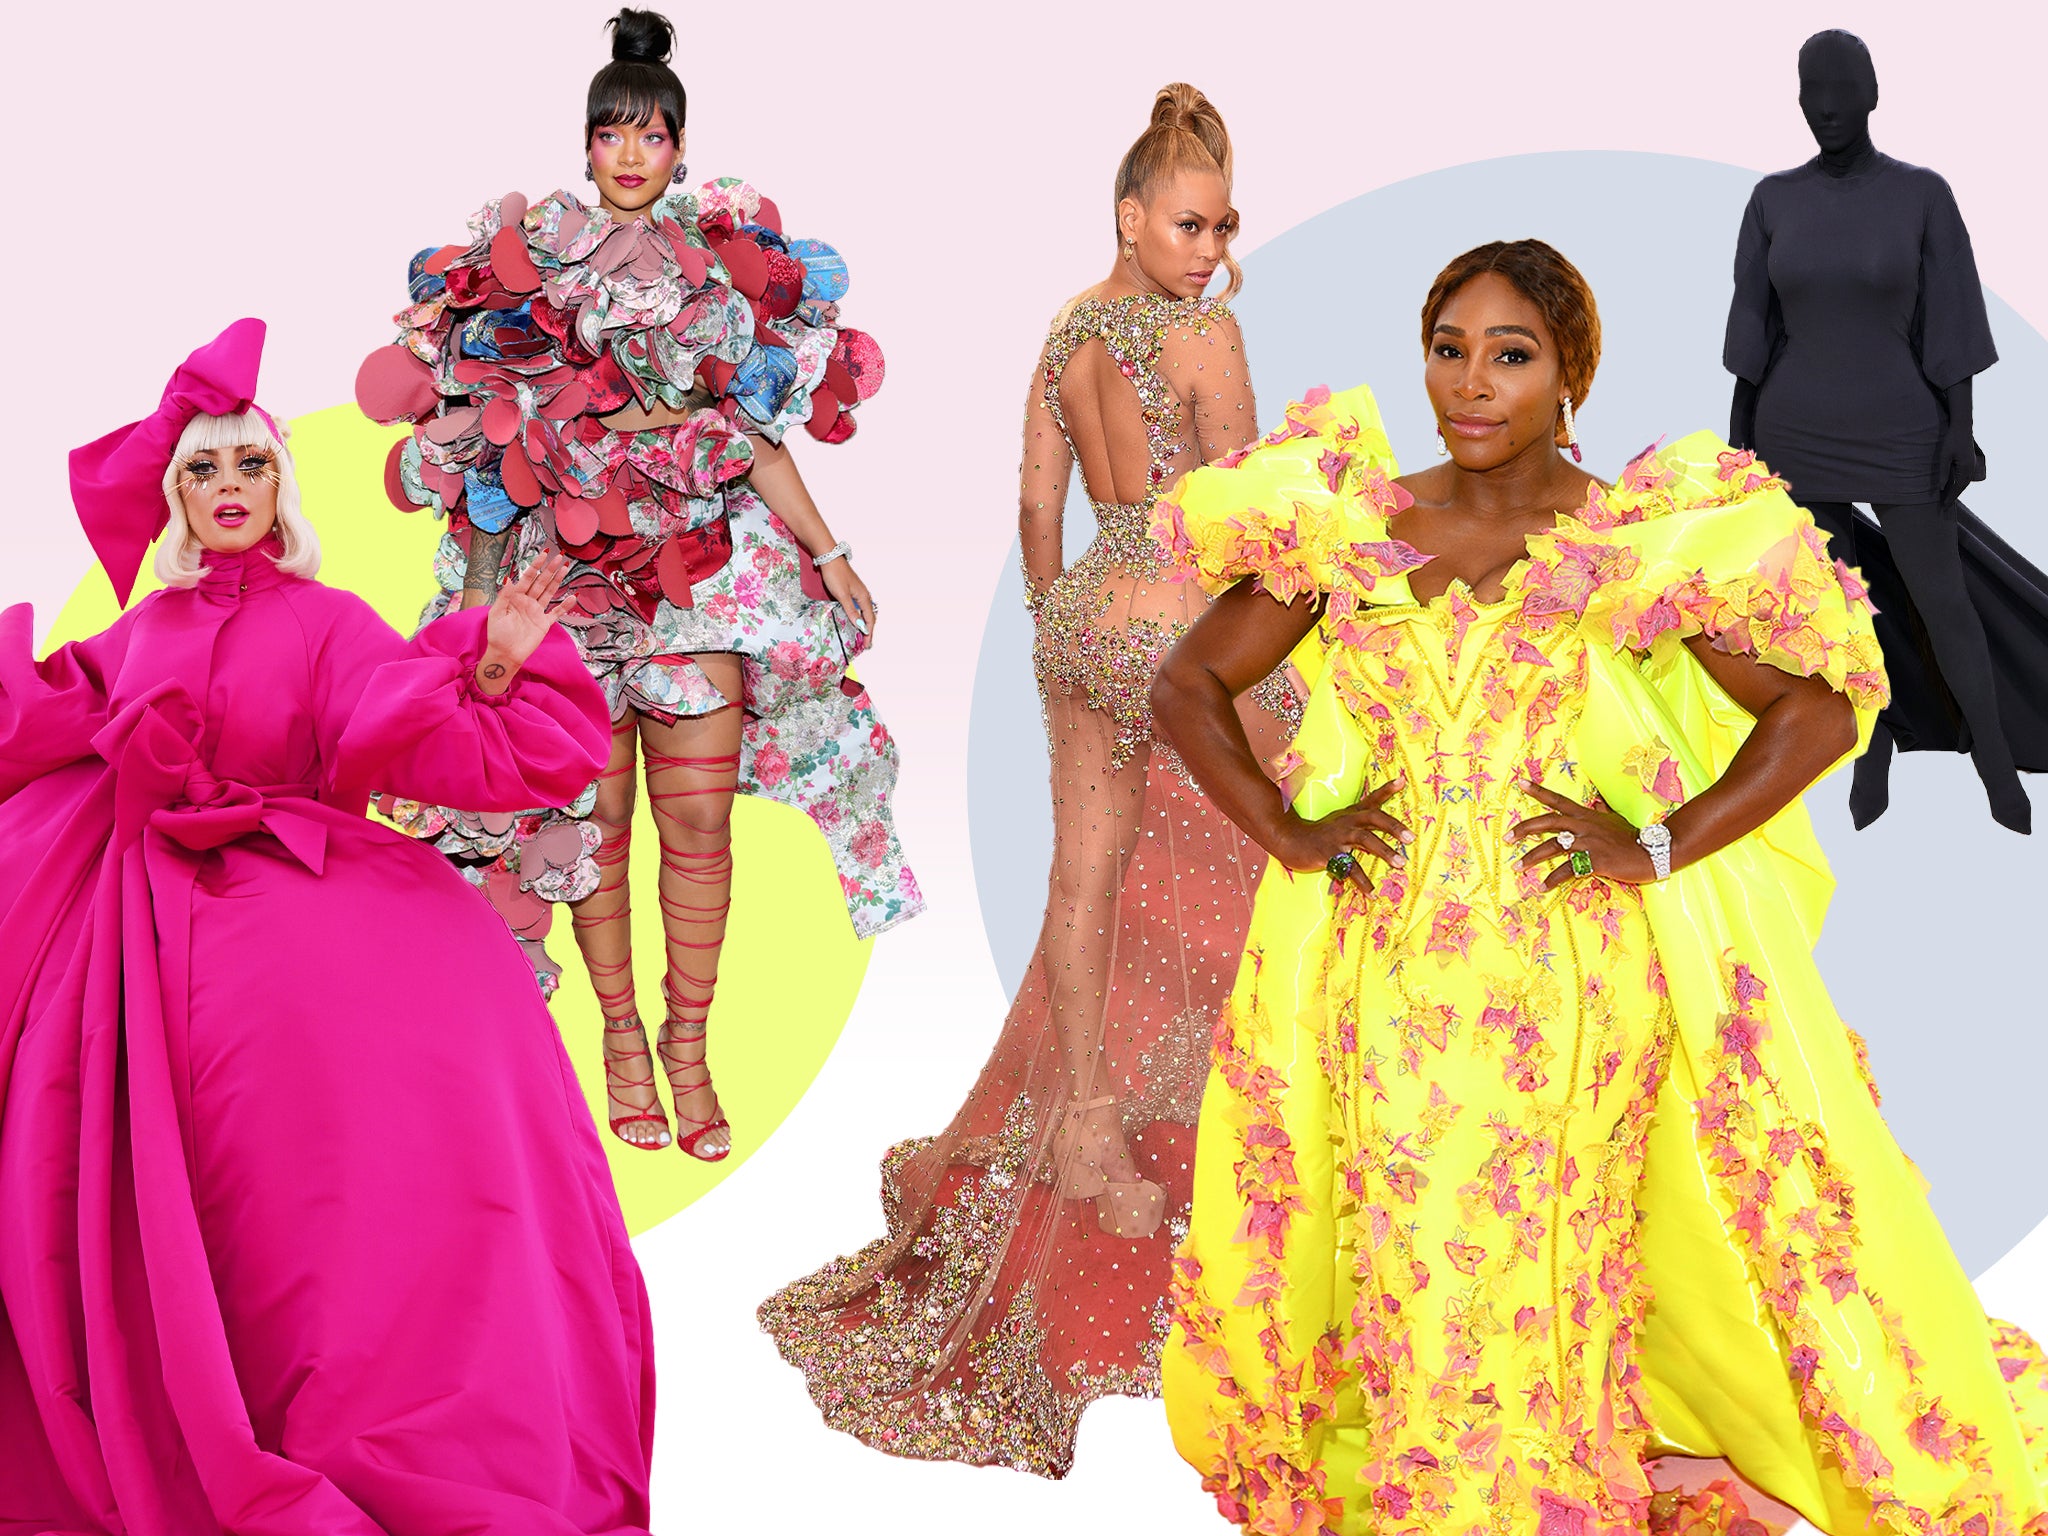 The Met Gala 2022 News, Dates, Hosts, Theme, and More